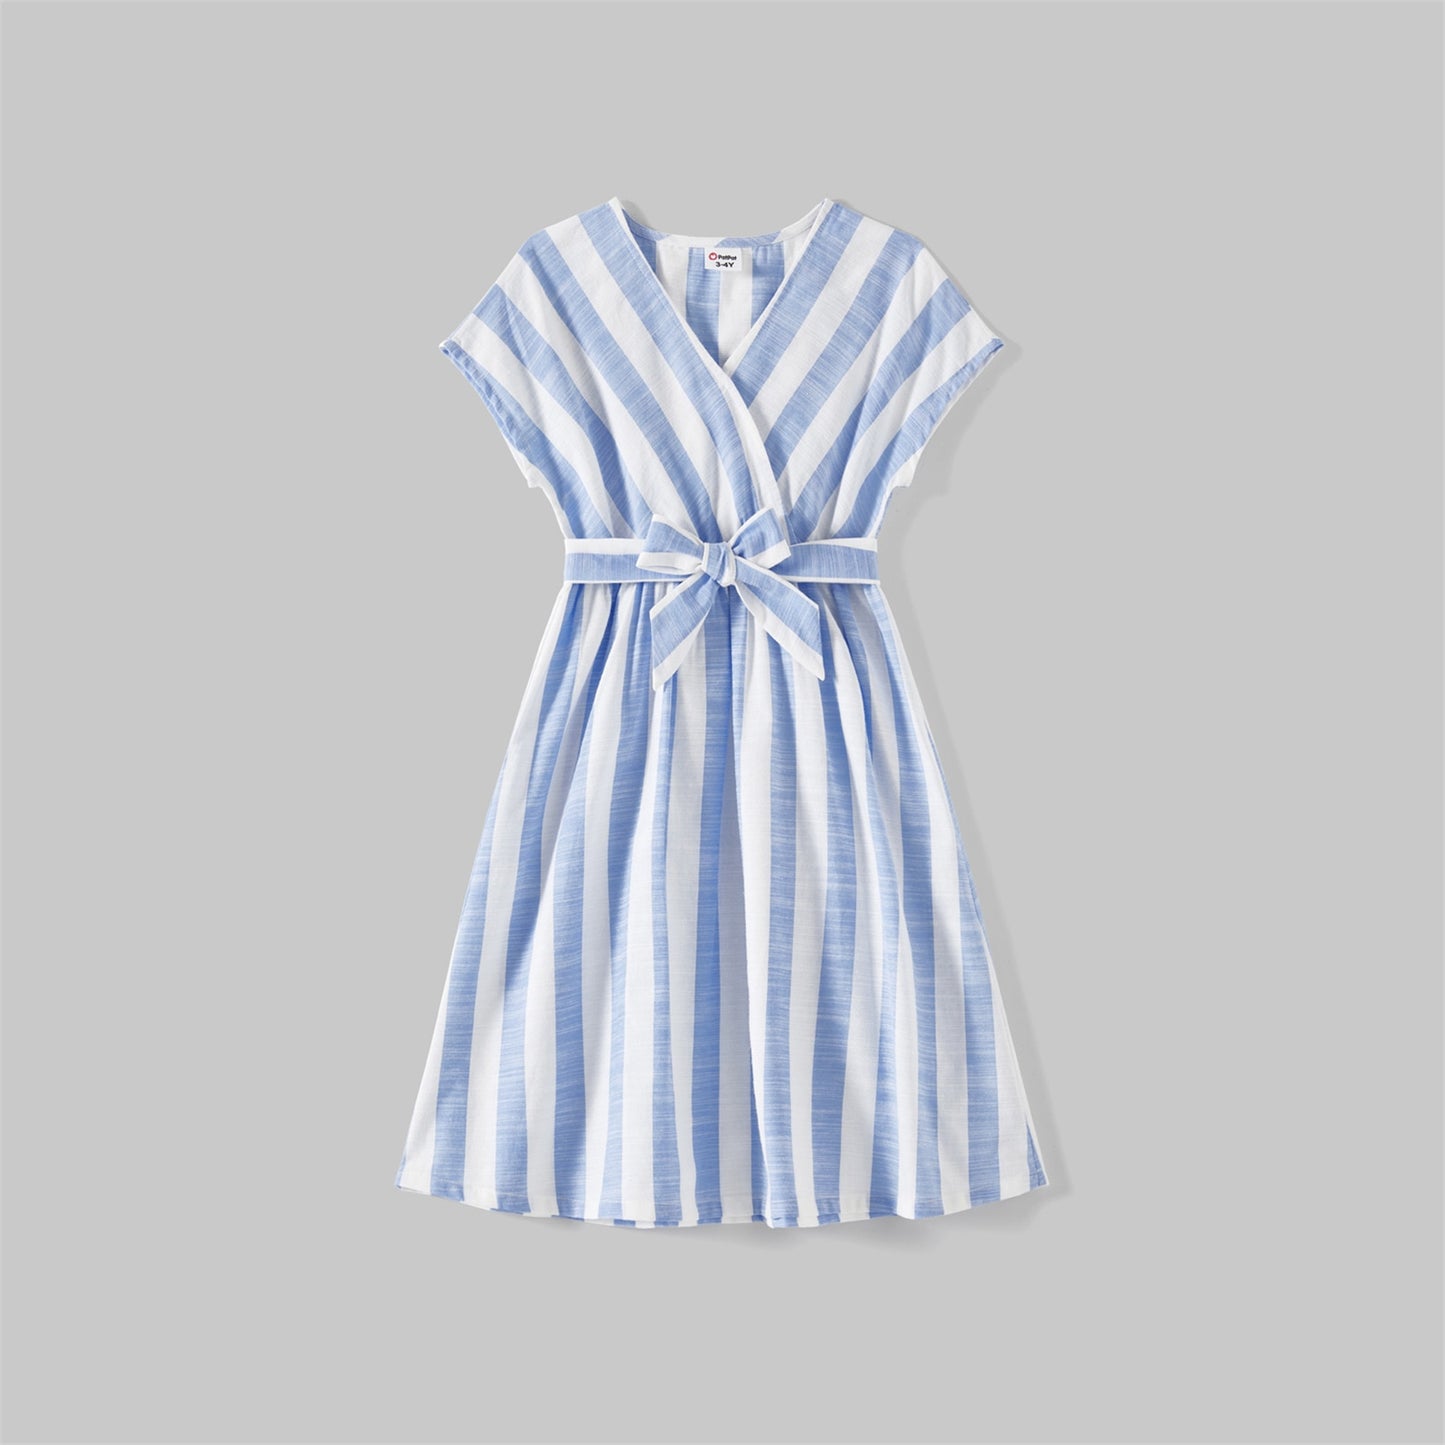 Family Matching! Striped Belted Dresses & T-Shirts